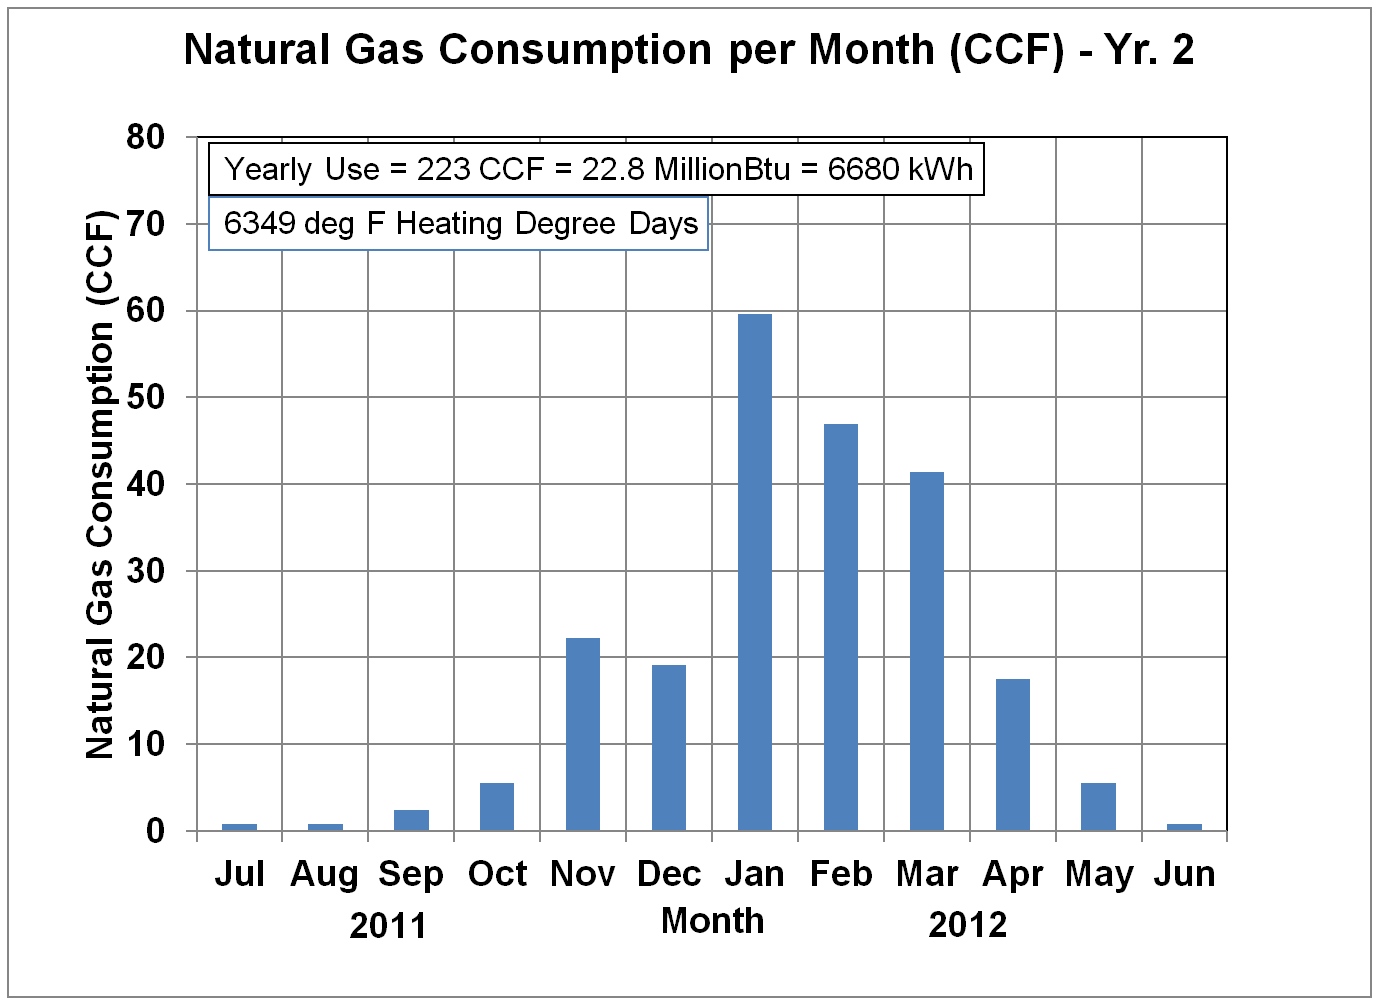 Natural Gas Usage in CCF - Yr. 2